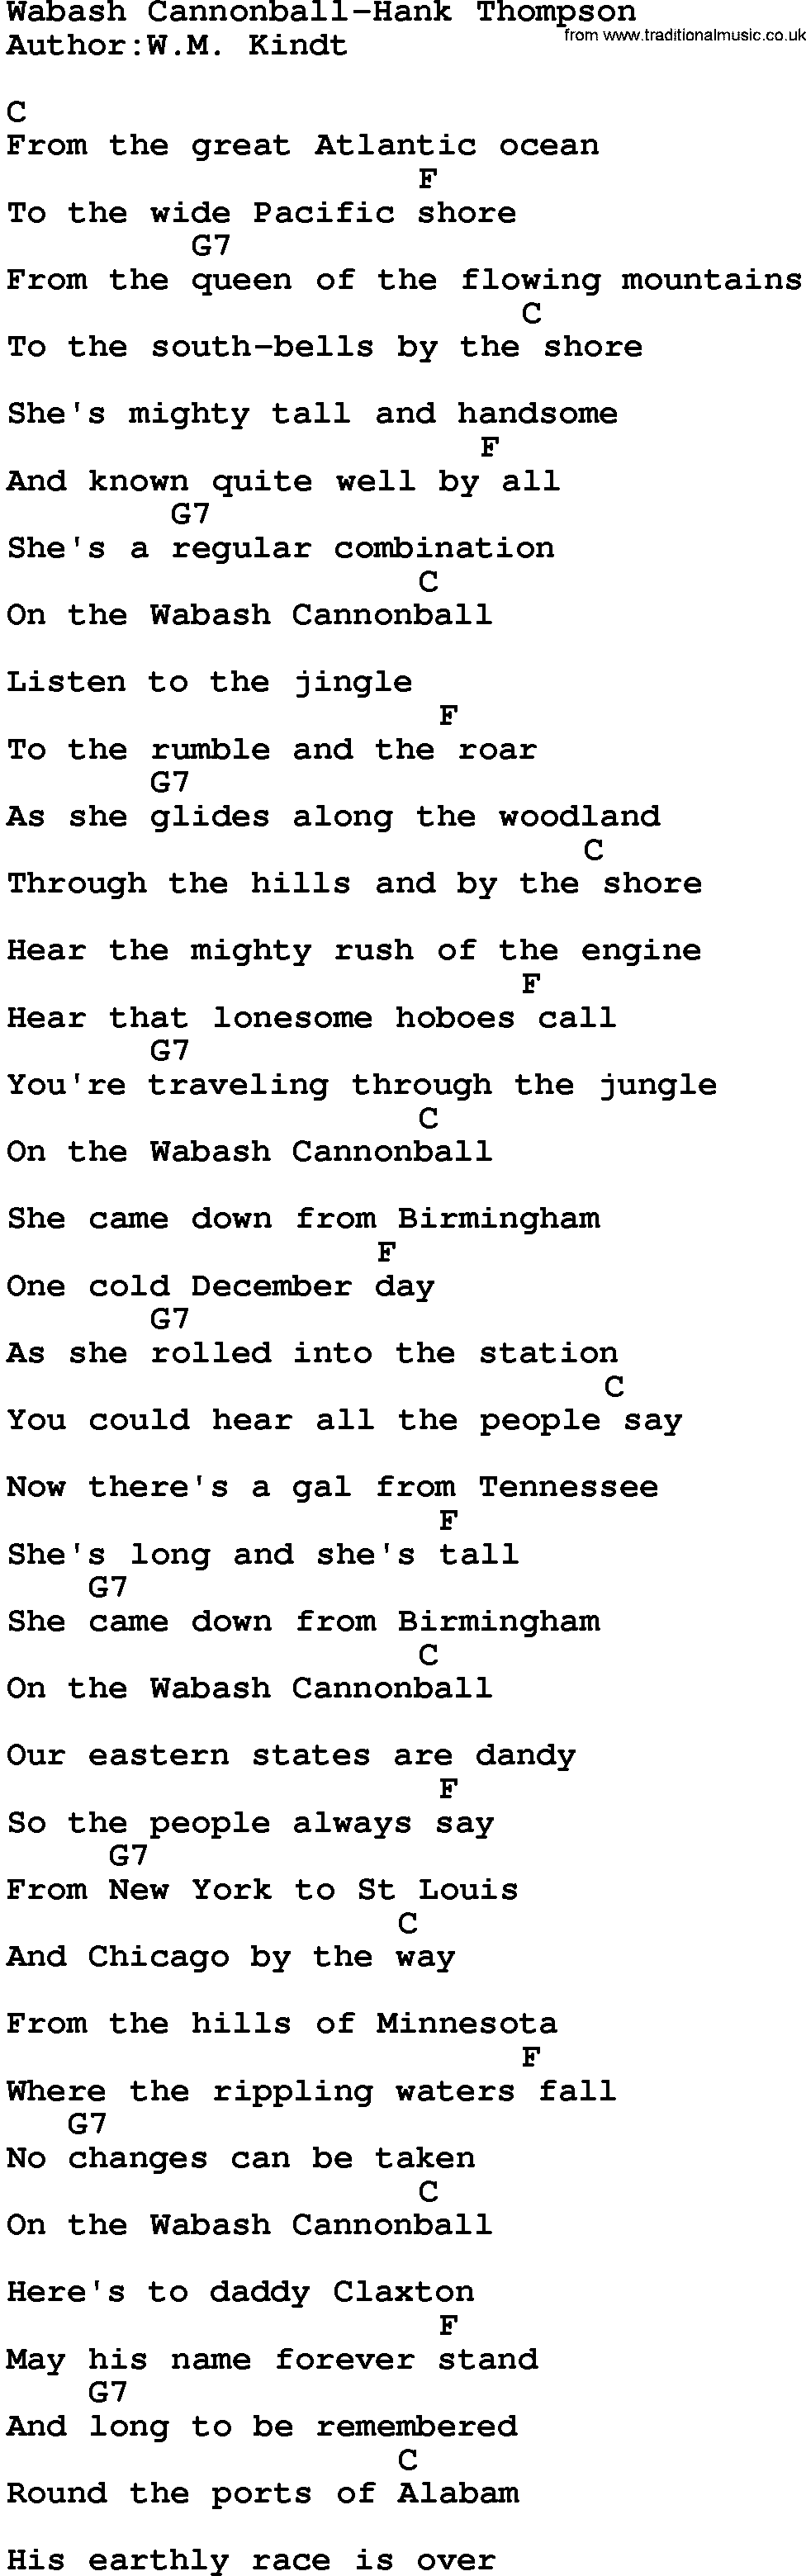 Country music song: Wabash Cannonball-Hank Thompson lyrics and chords